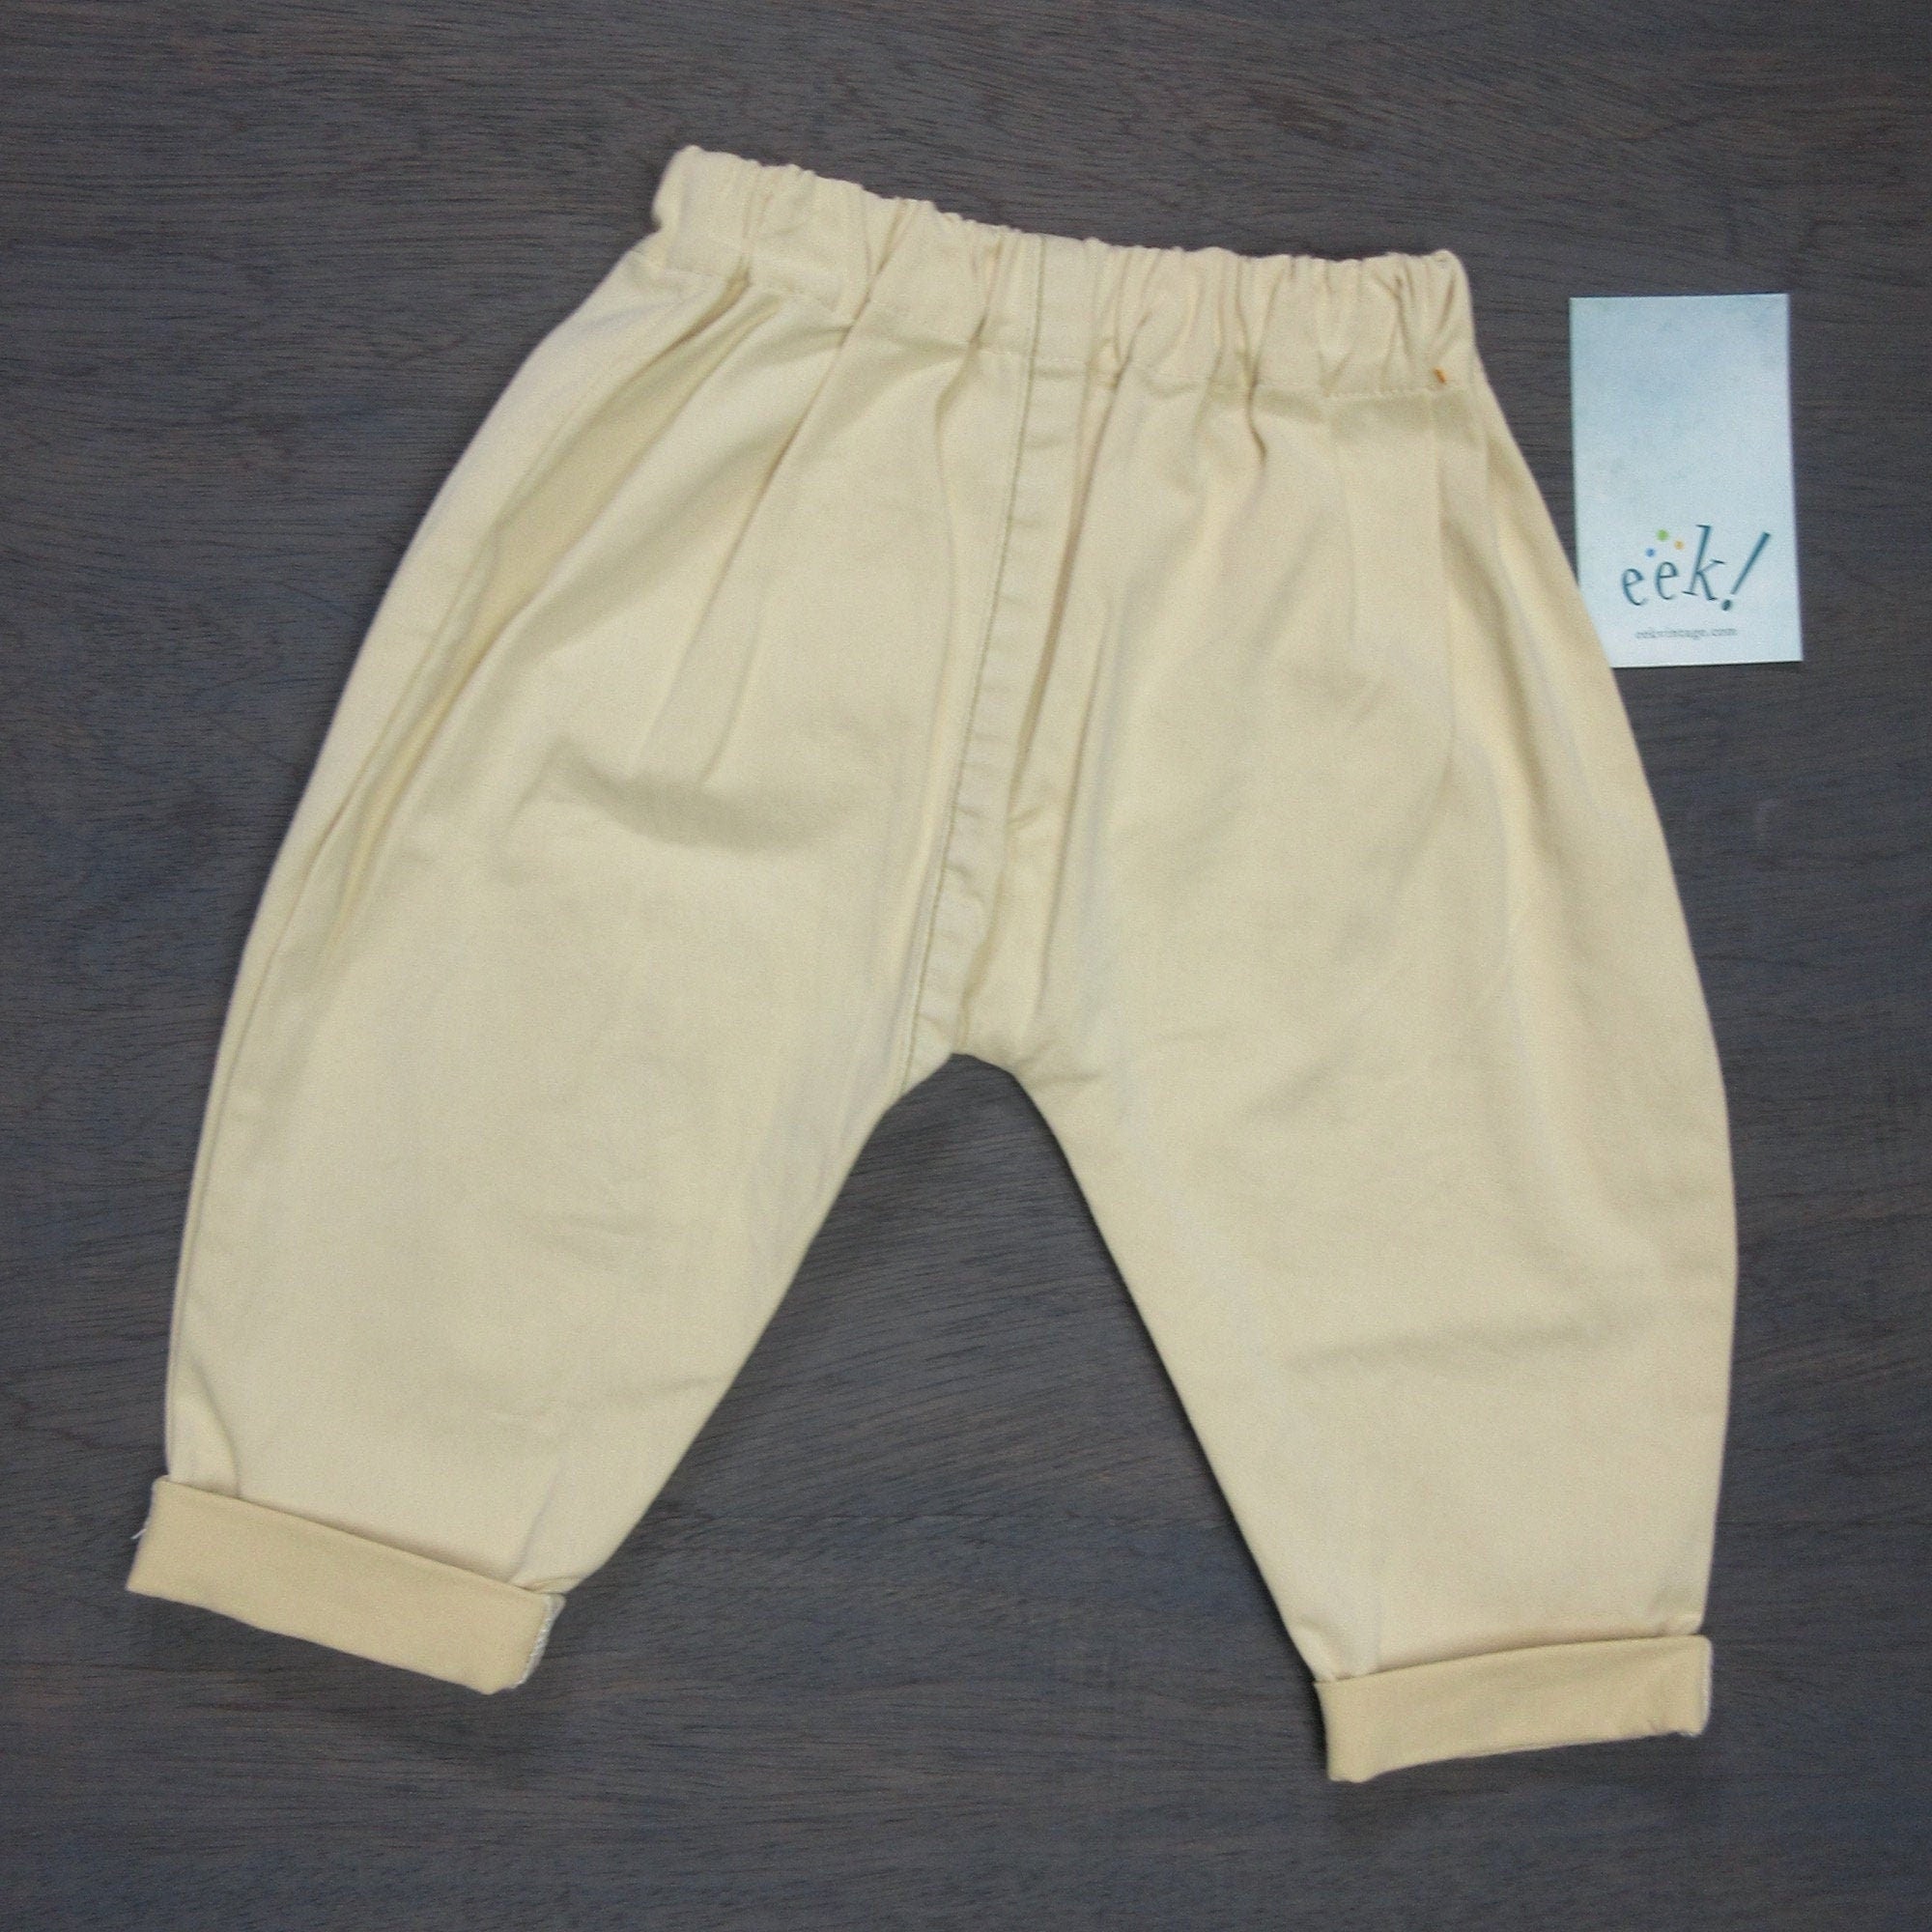 Beachcomber pants in cream khaki with vintage pink pocket on back, elastic waist, cuffed legs, size 6 months